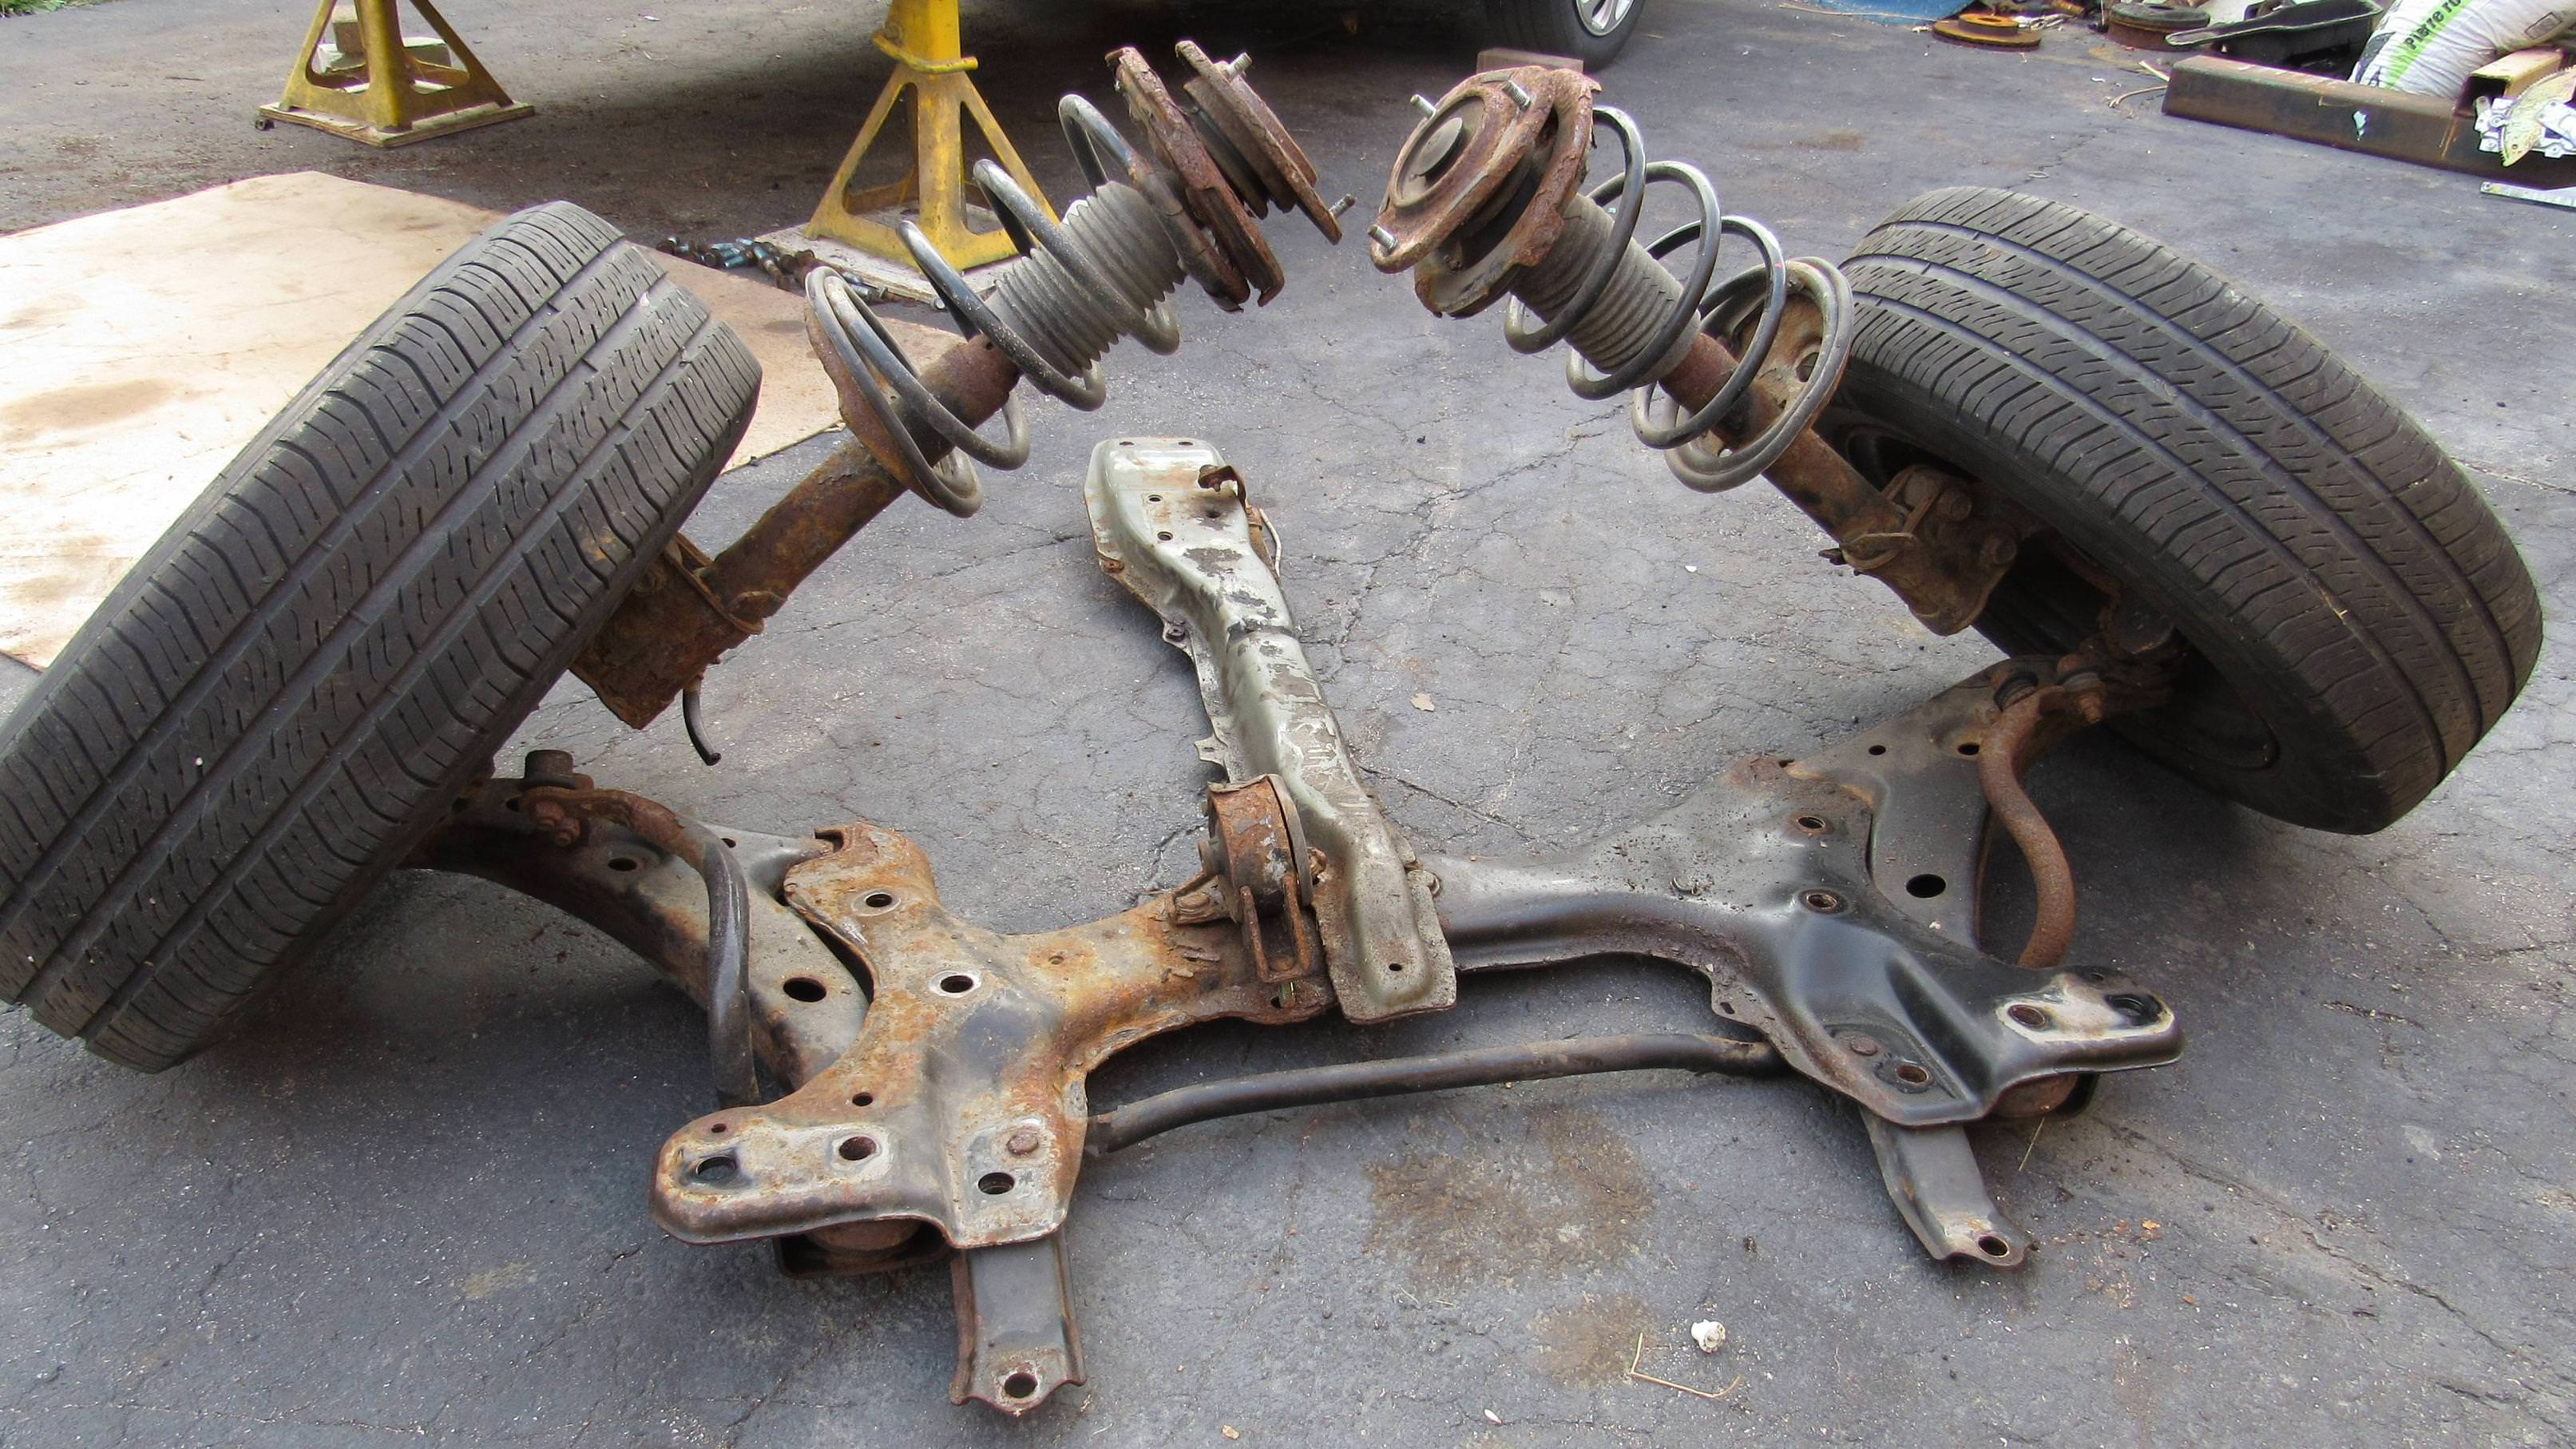 A vehicle's rusty front wheel suspension system